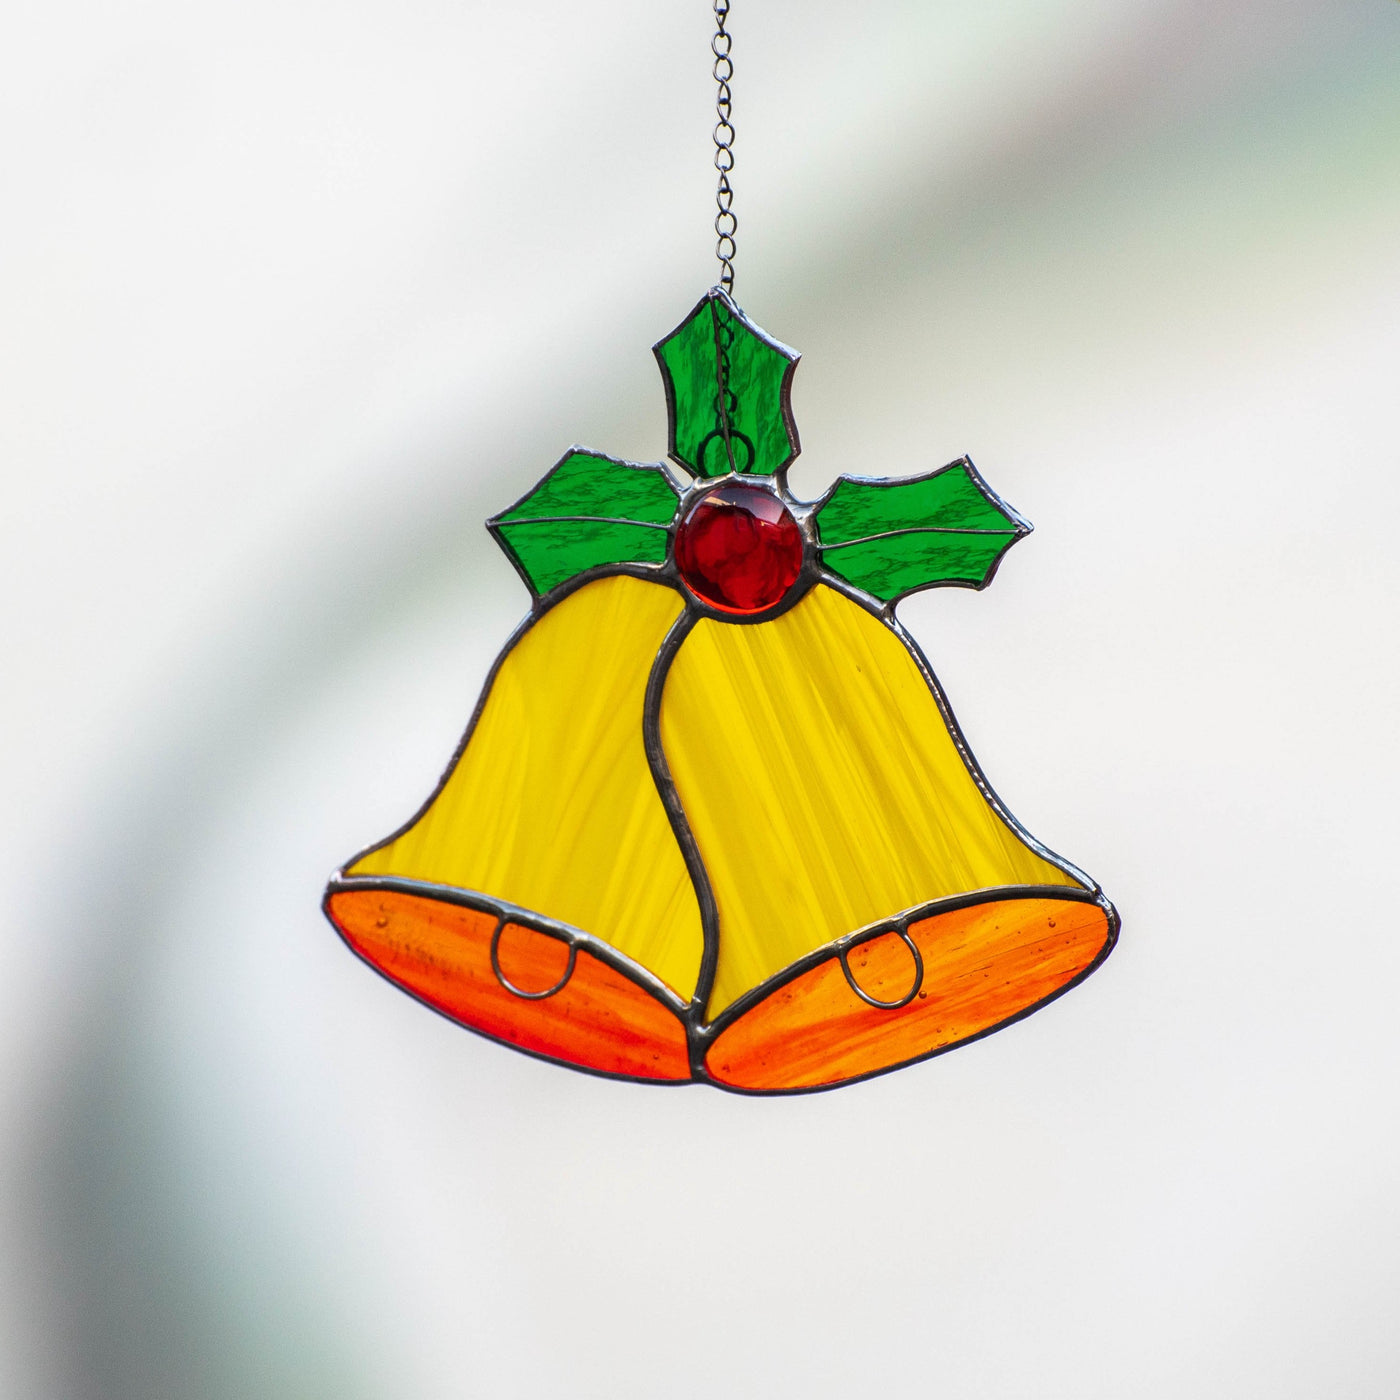 Stained glass yellow christmas bells suncatcher with holly leaves on top